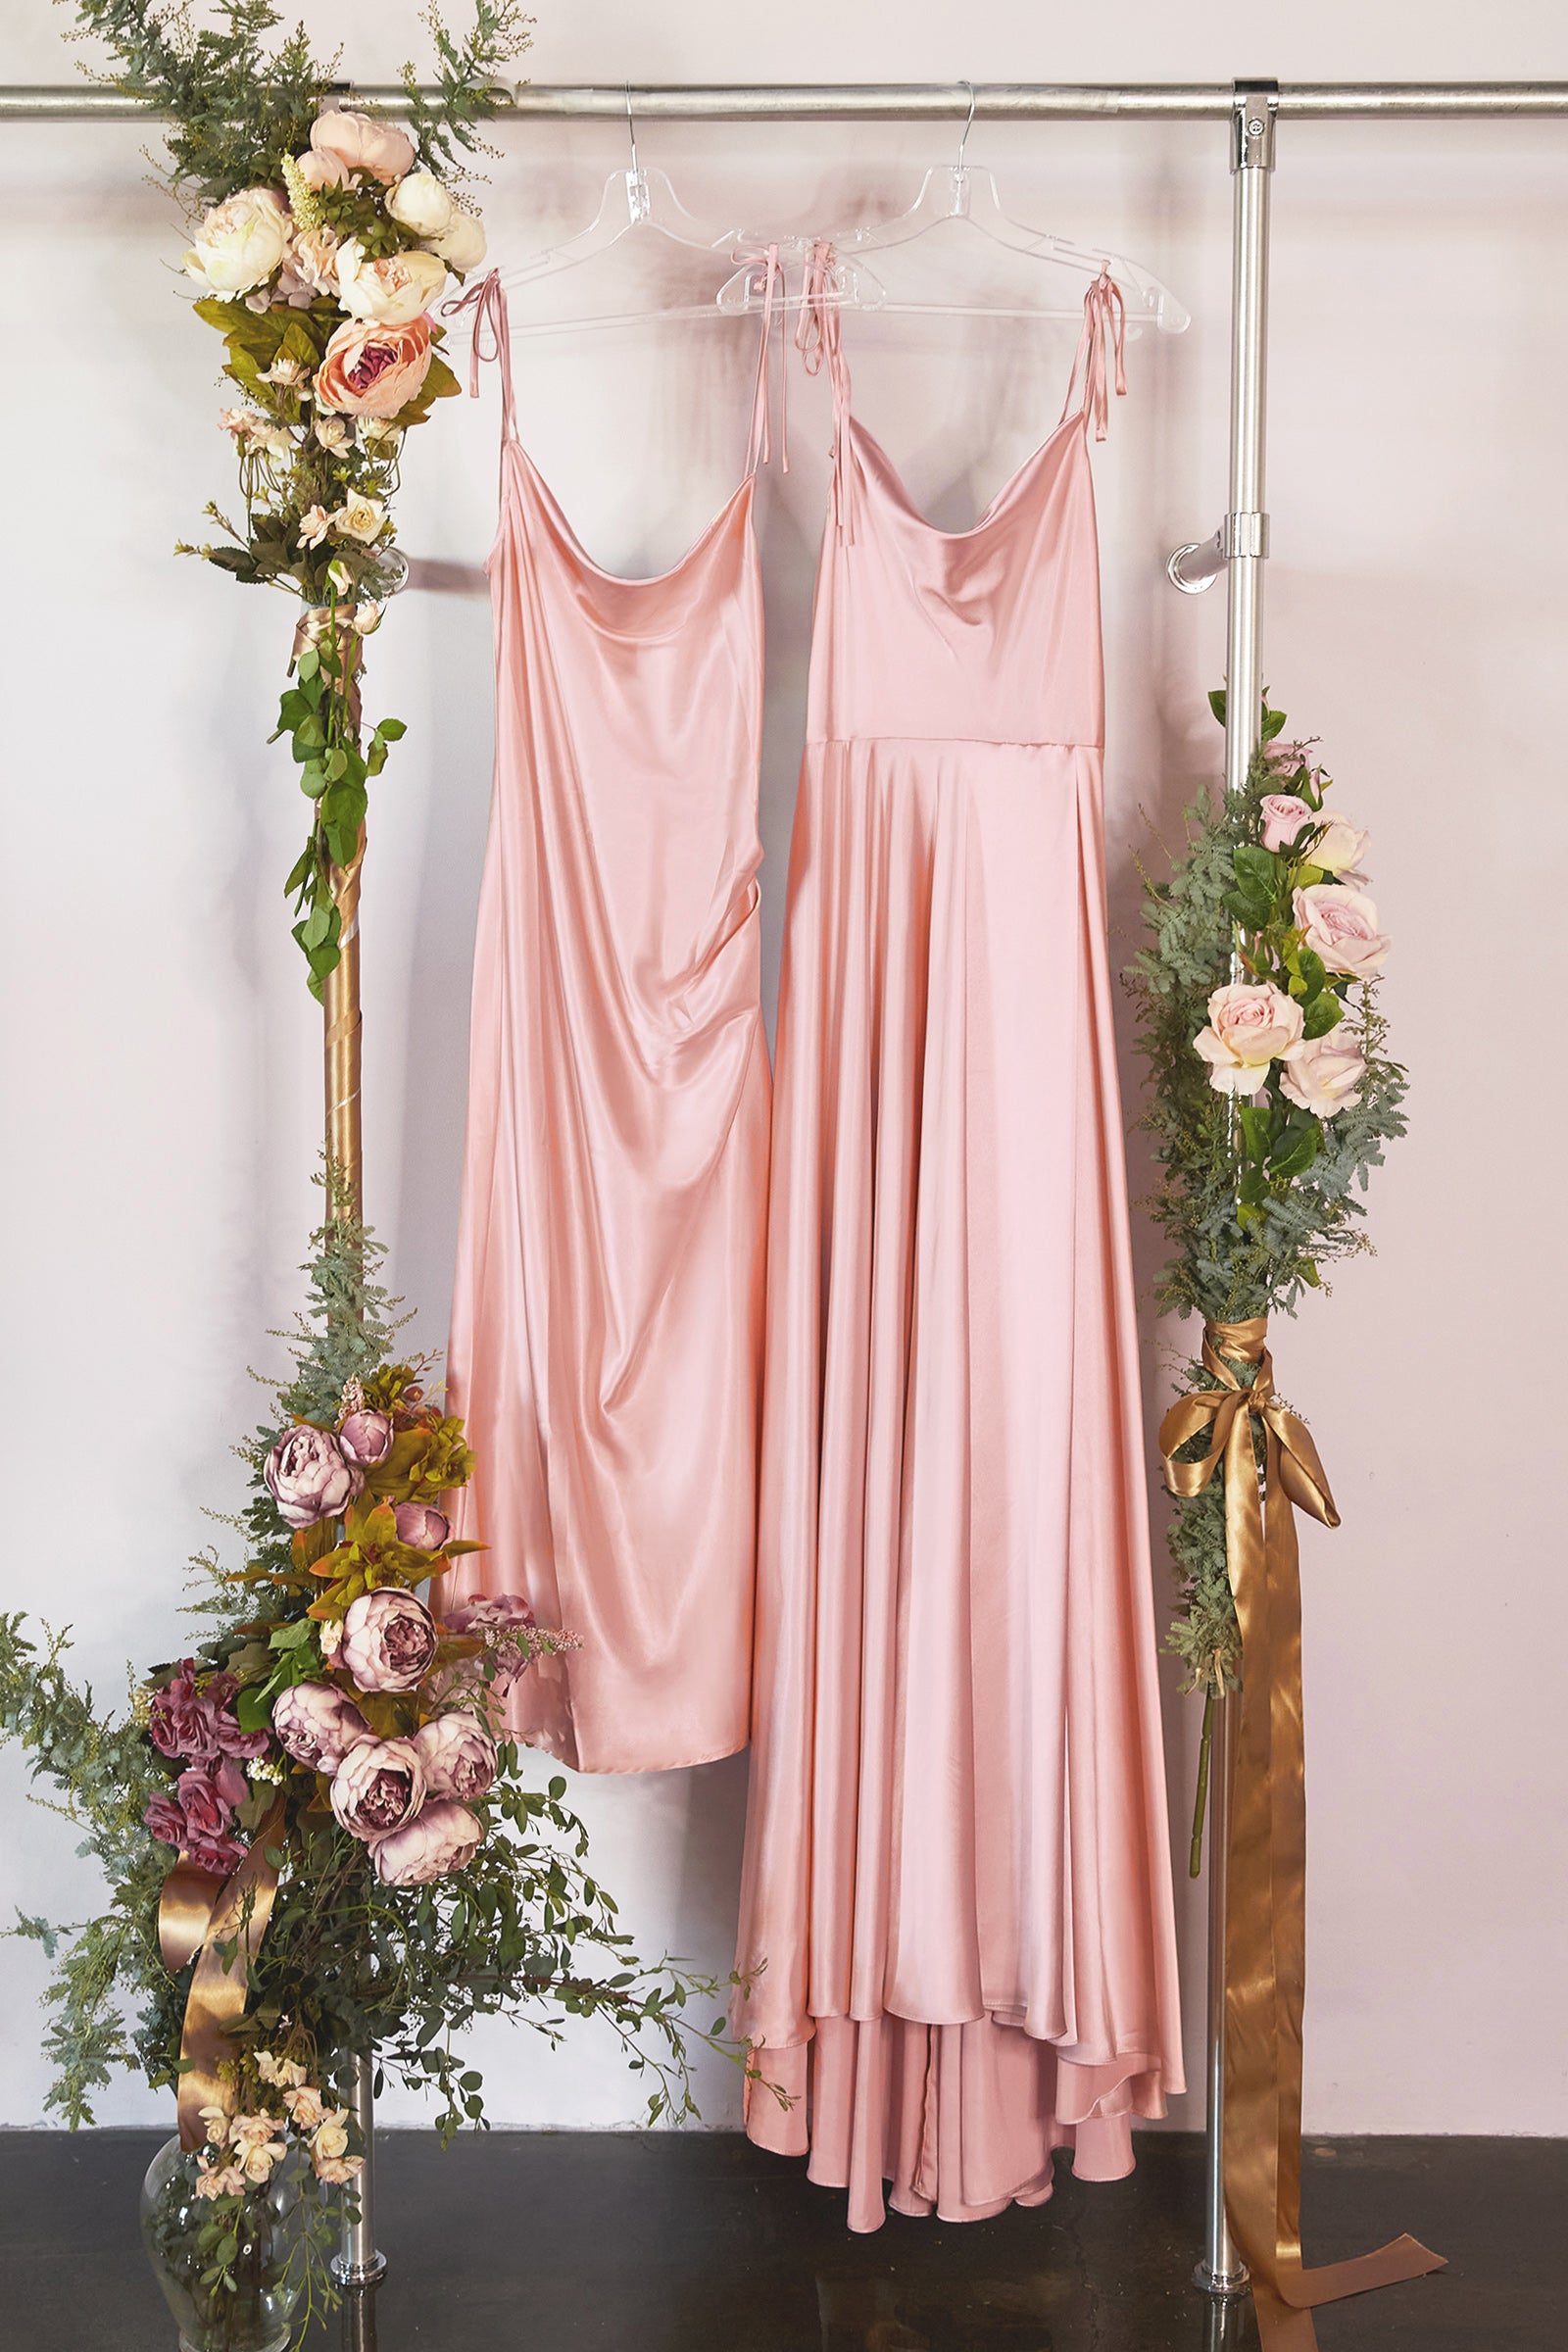 Top 10 Bridesmaid Dress Trends for 2023